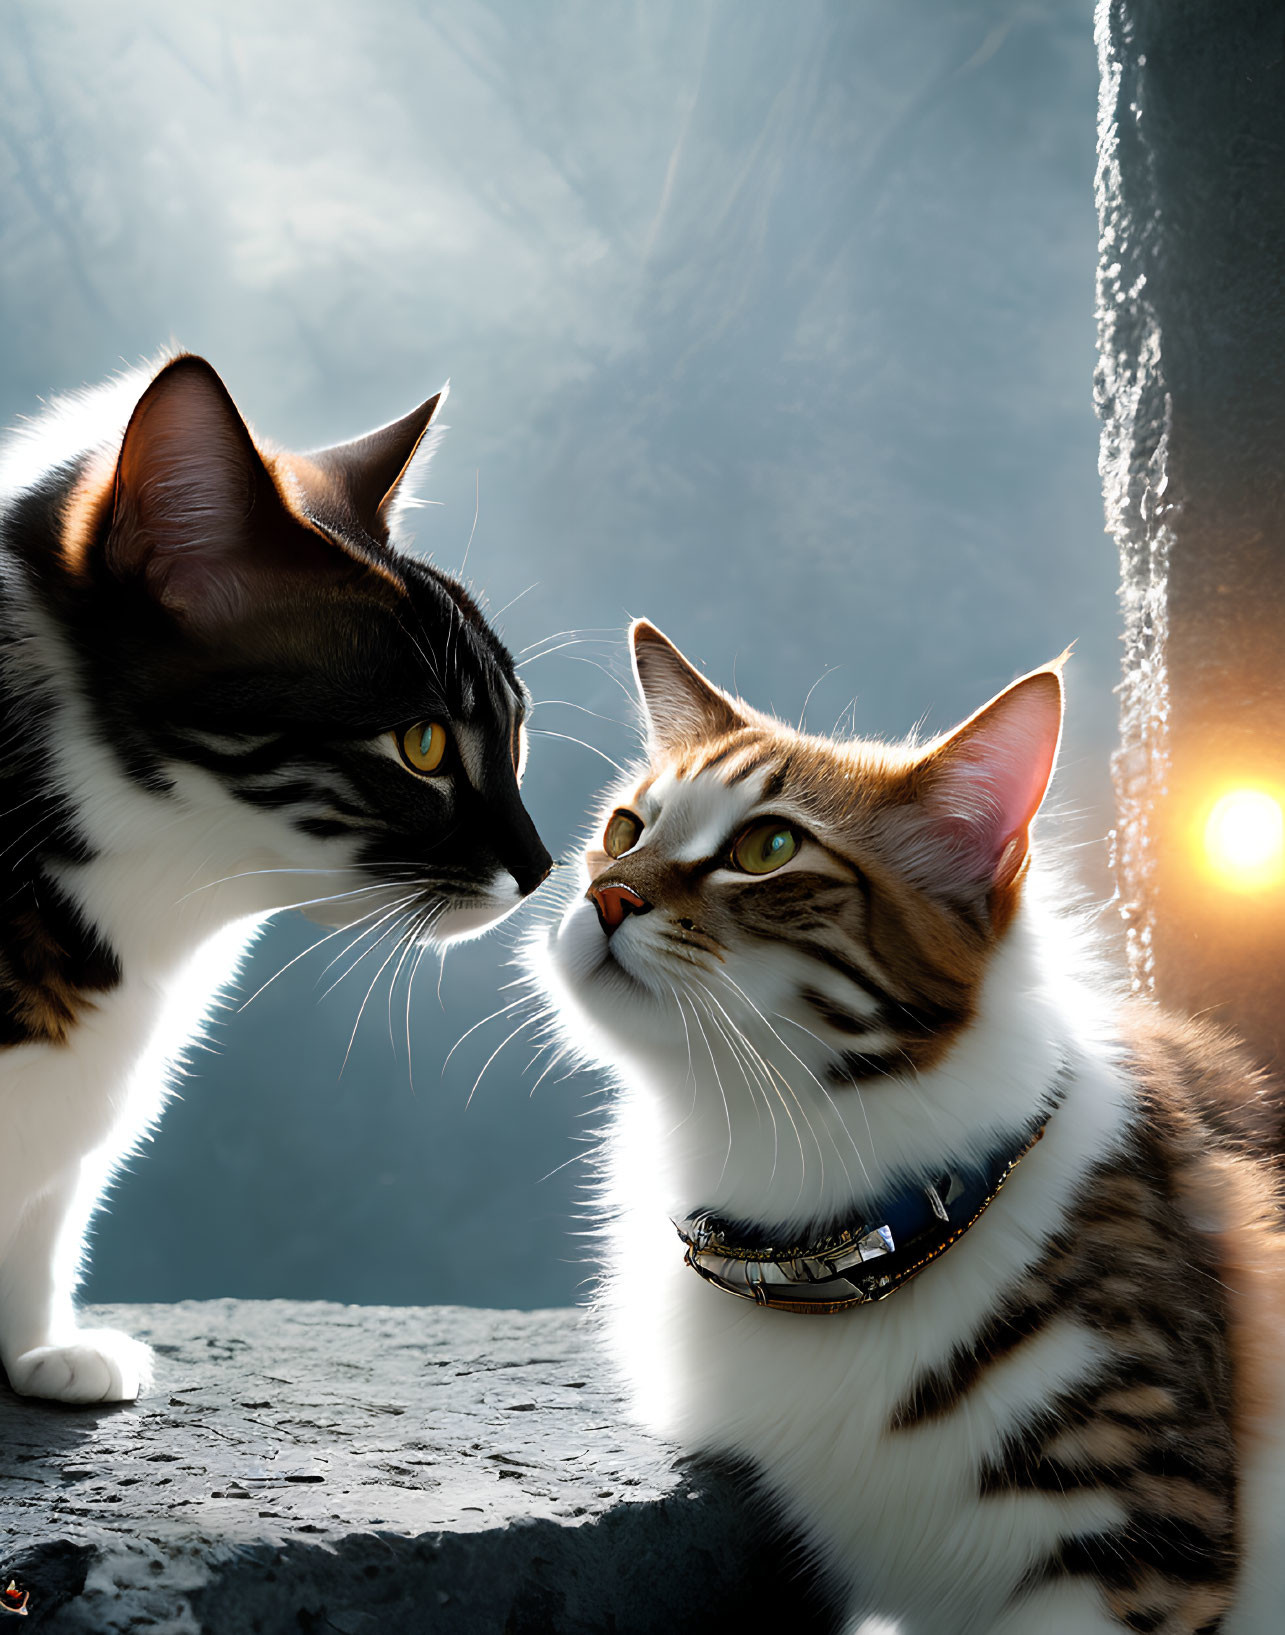 Two cats with striking patterns in dramatic lighting